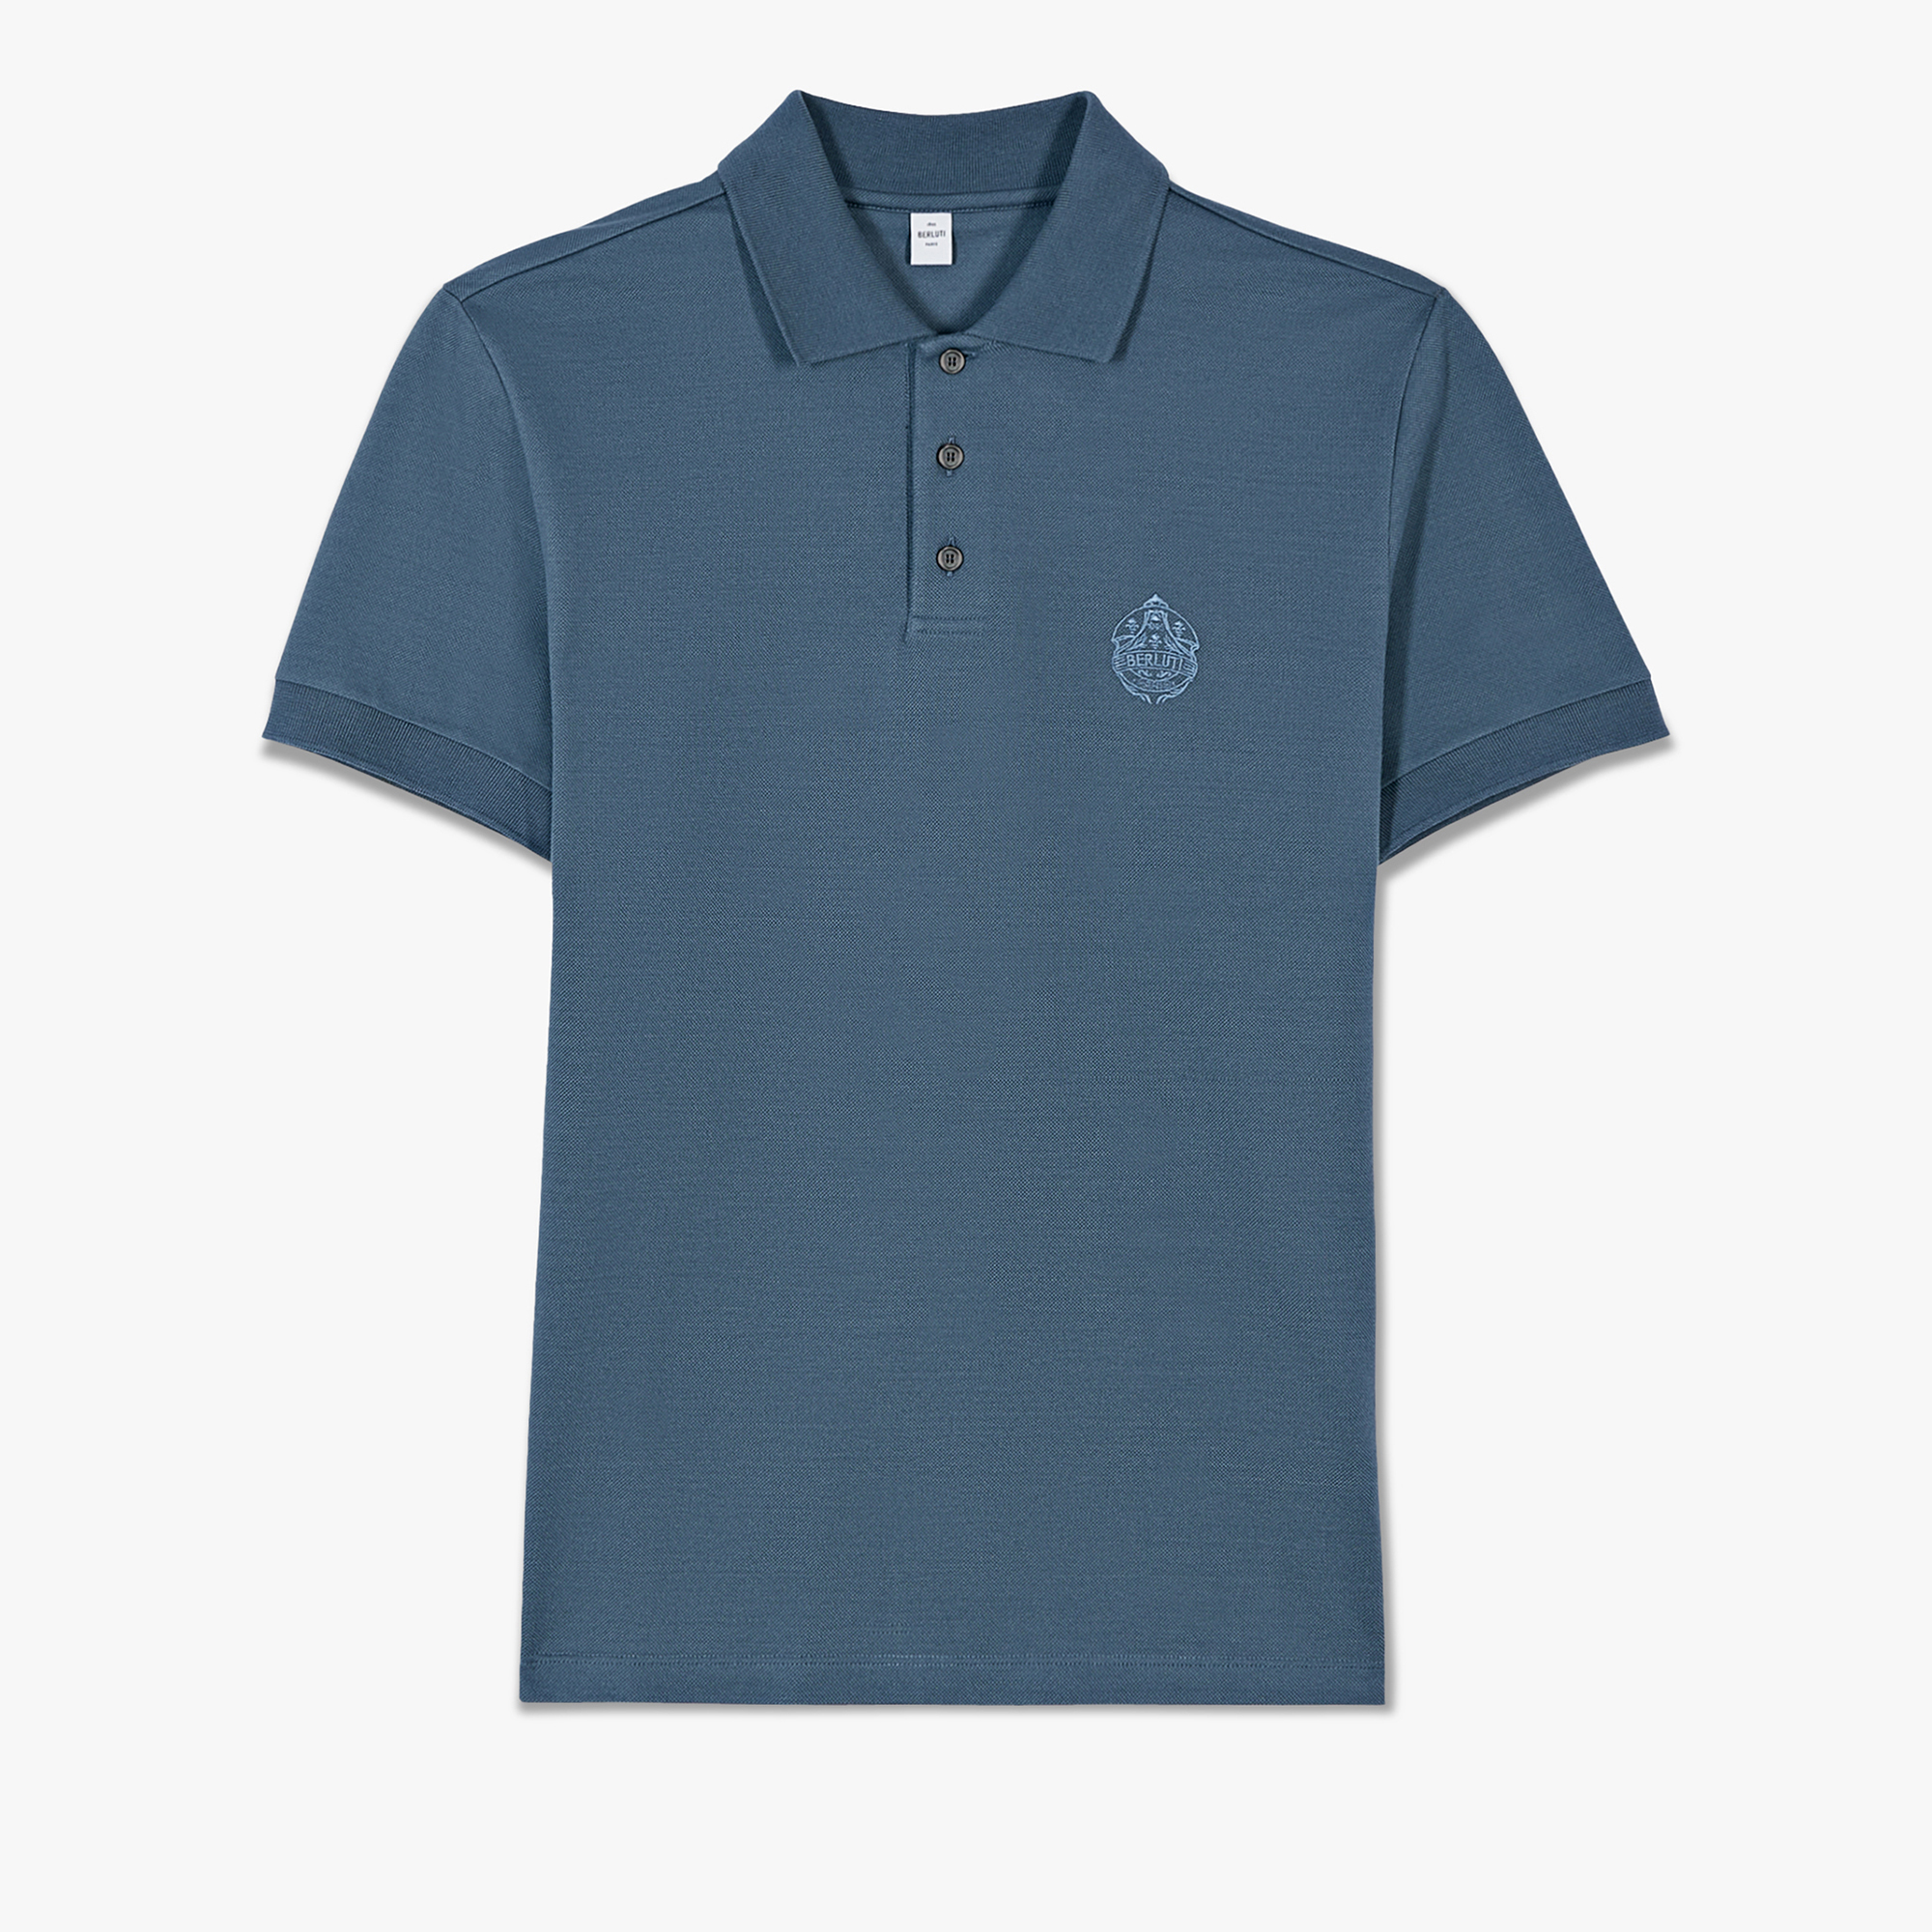 Polo Shirt With Embroidered Crest, GREYISH BLUE, hi-res